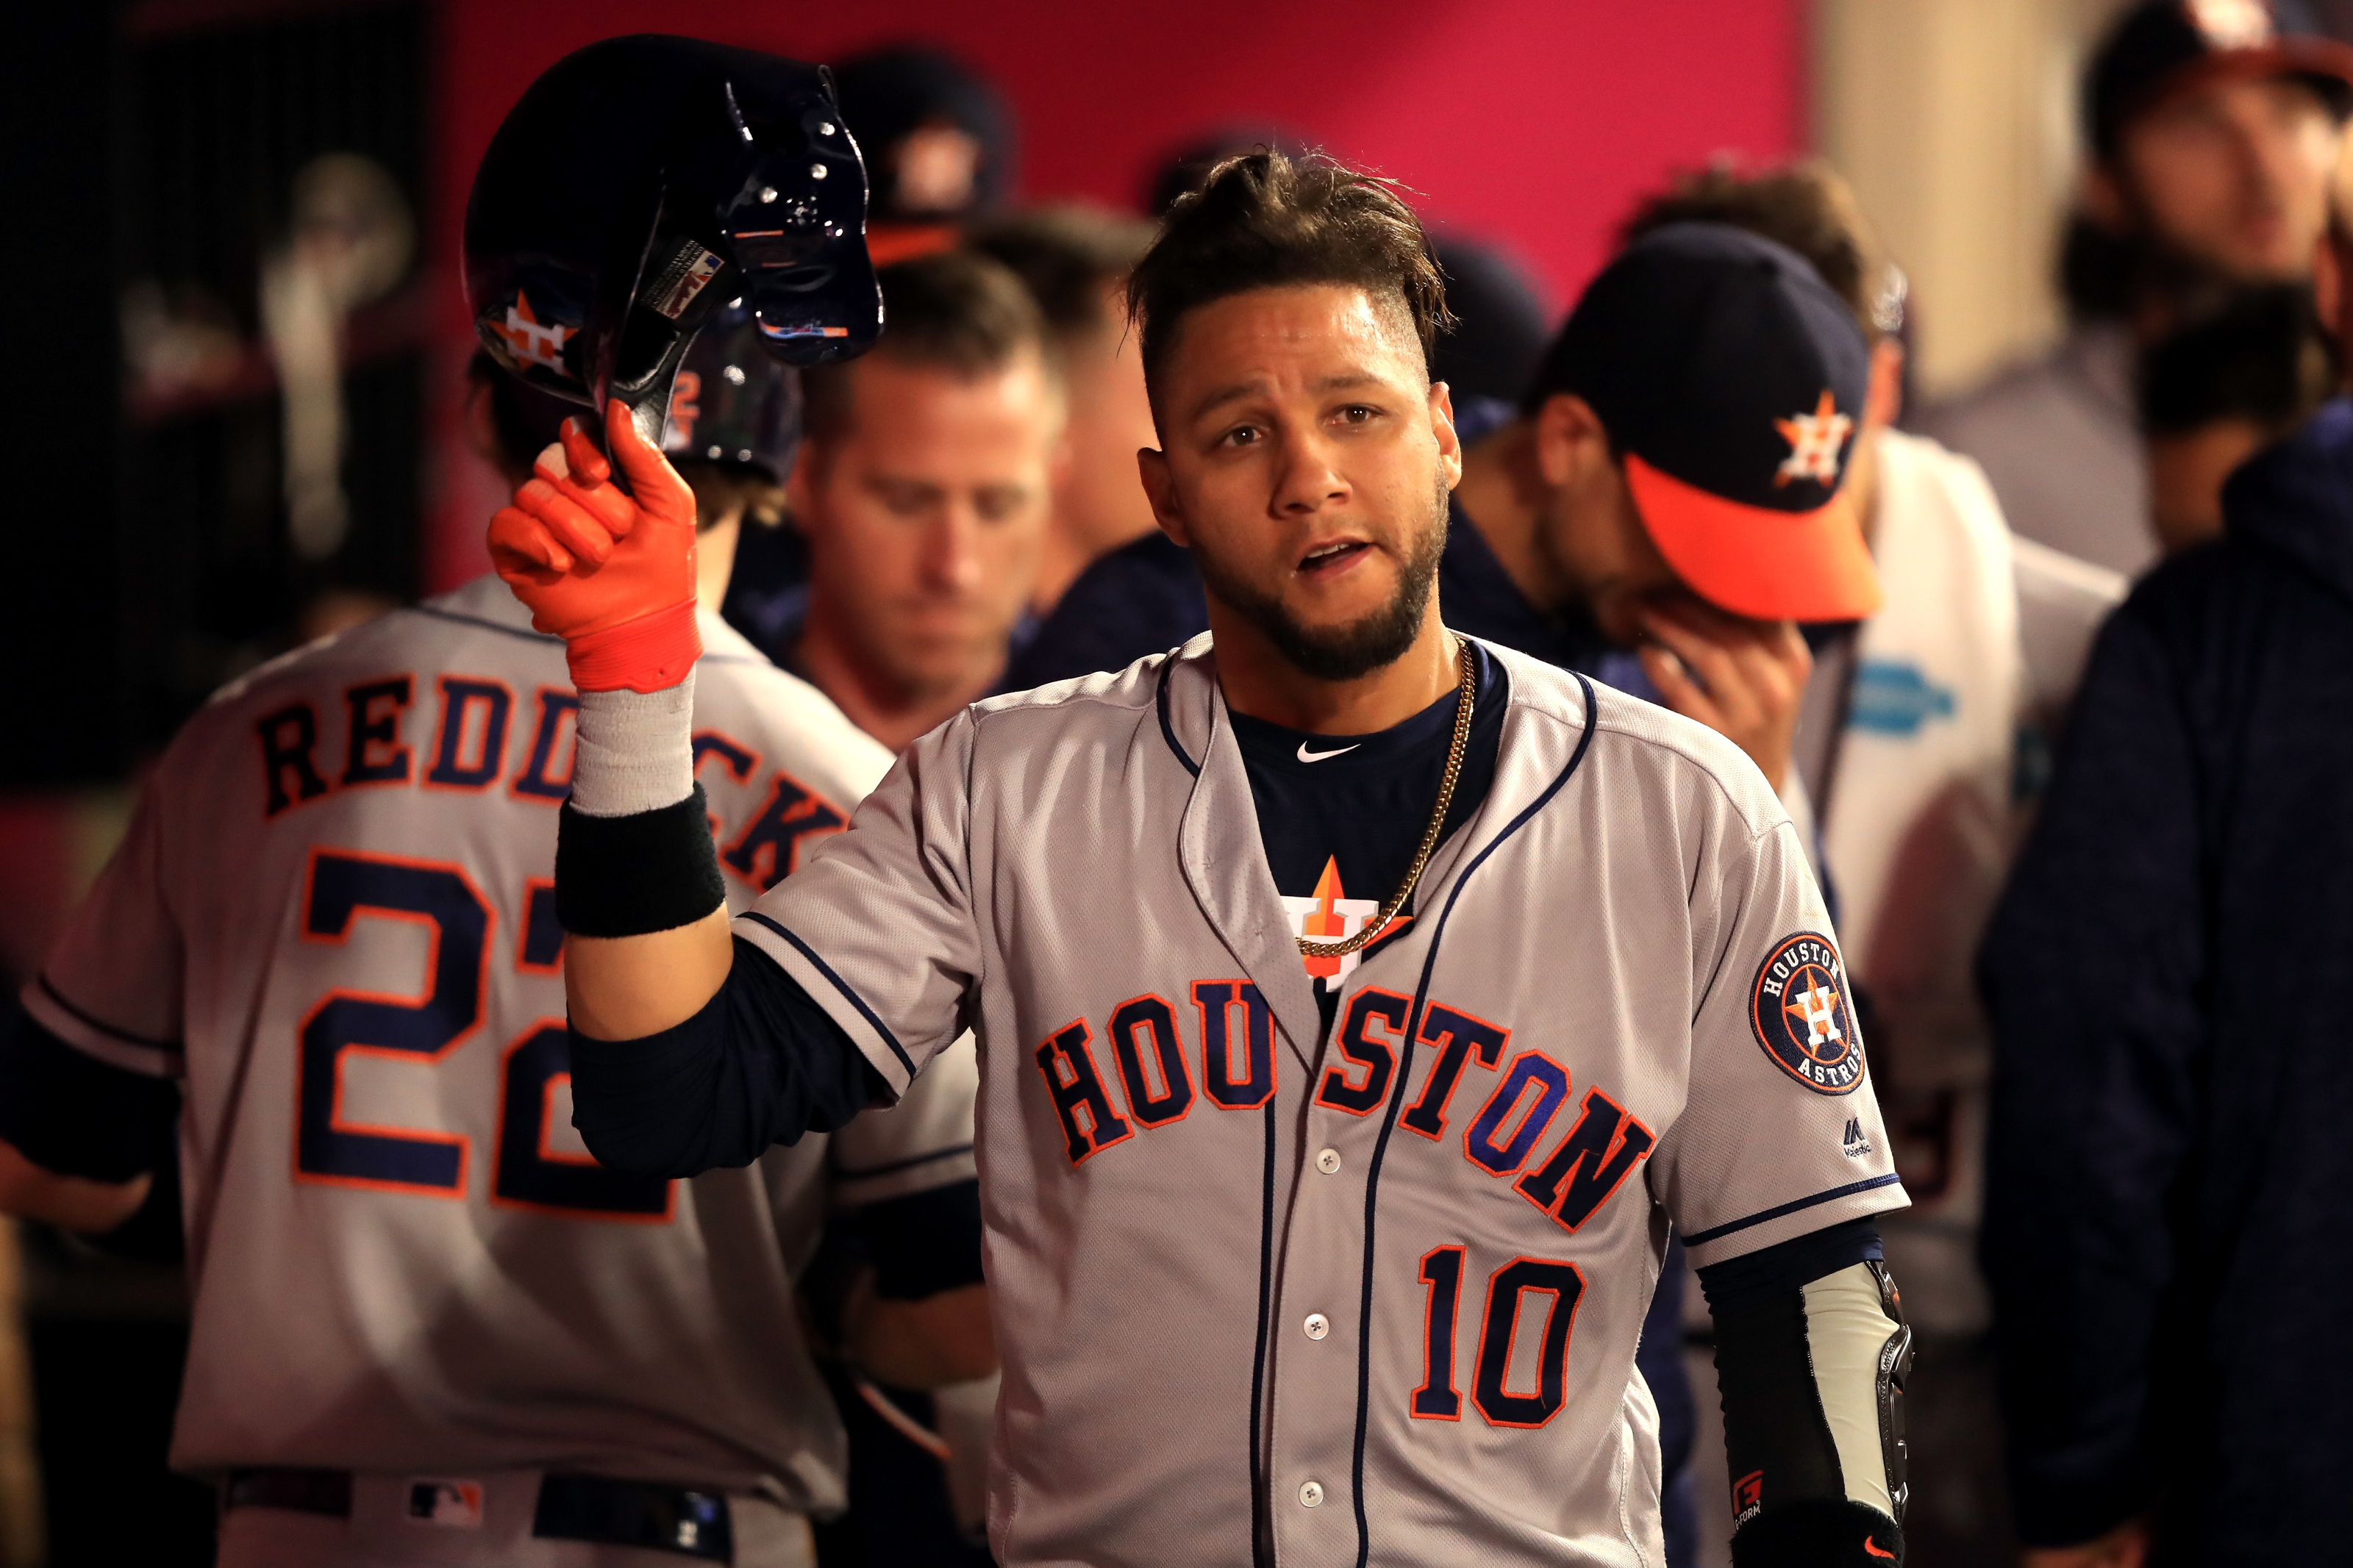 Houston Astros: Placing Yuli Gurriel at second base likely won't work